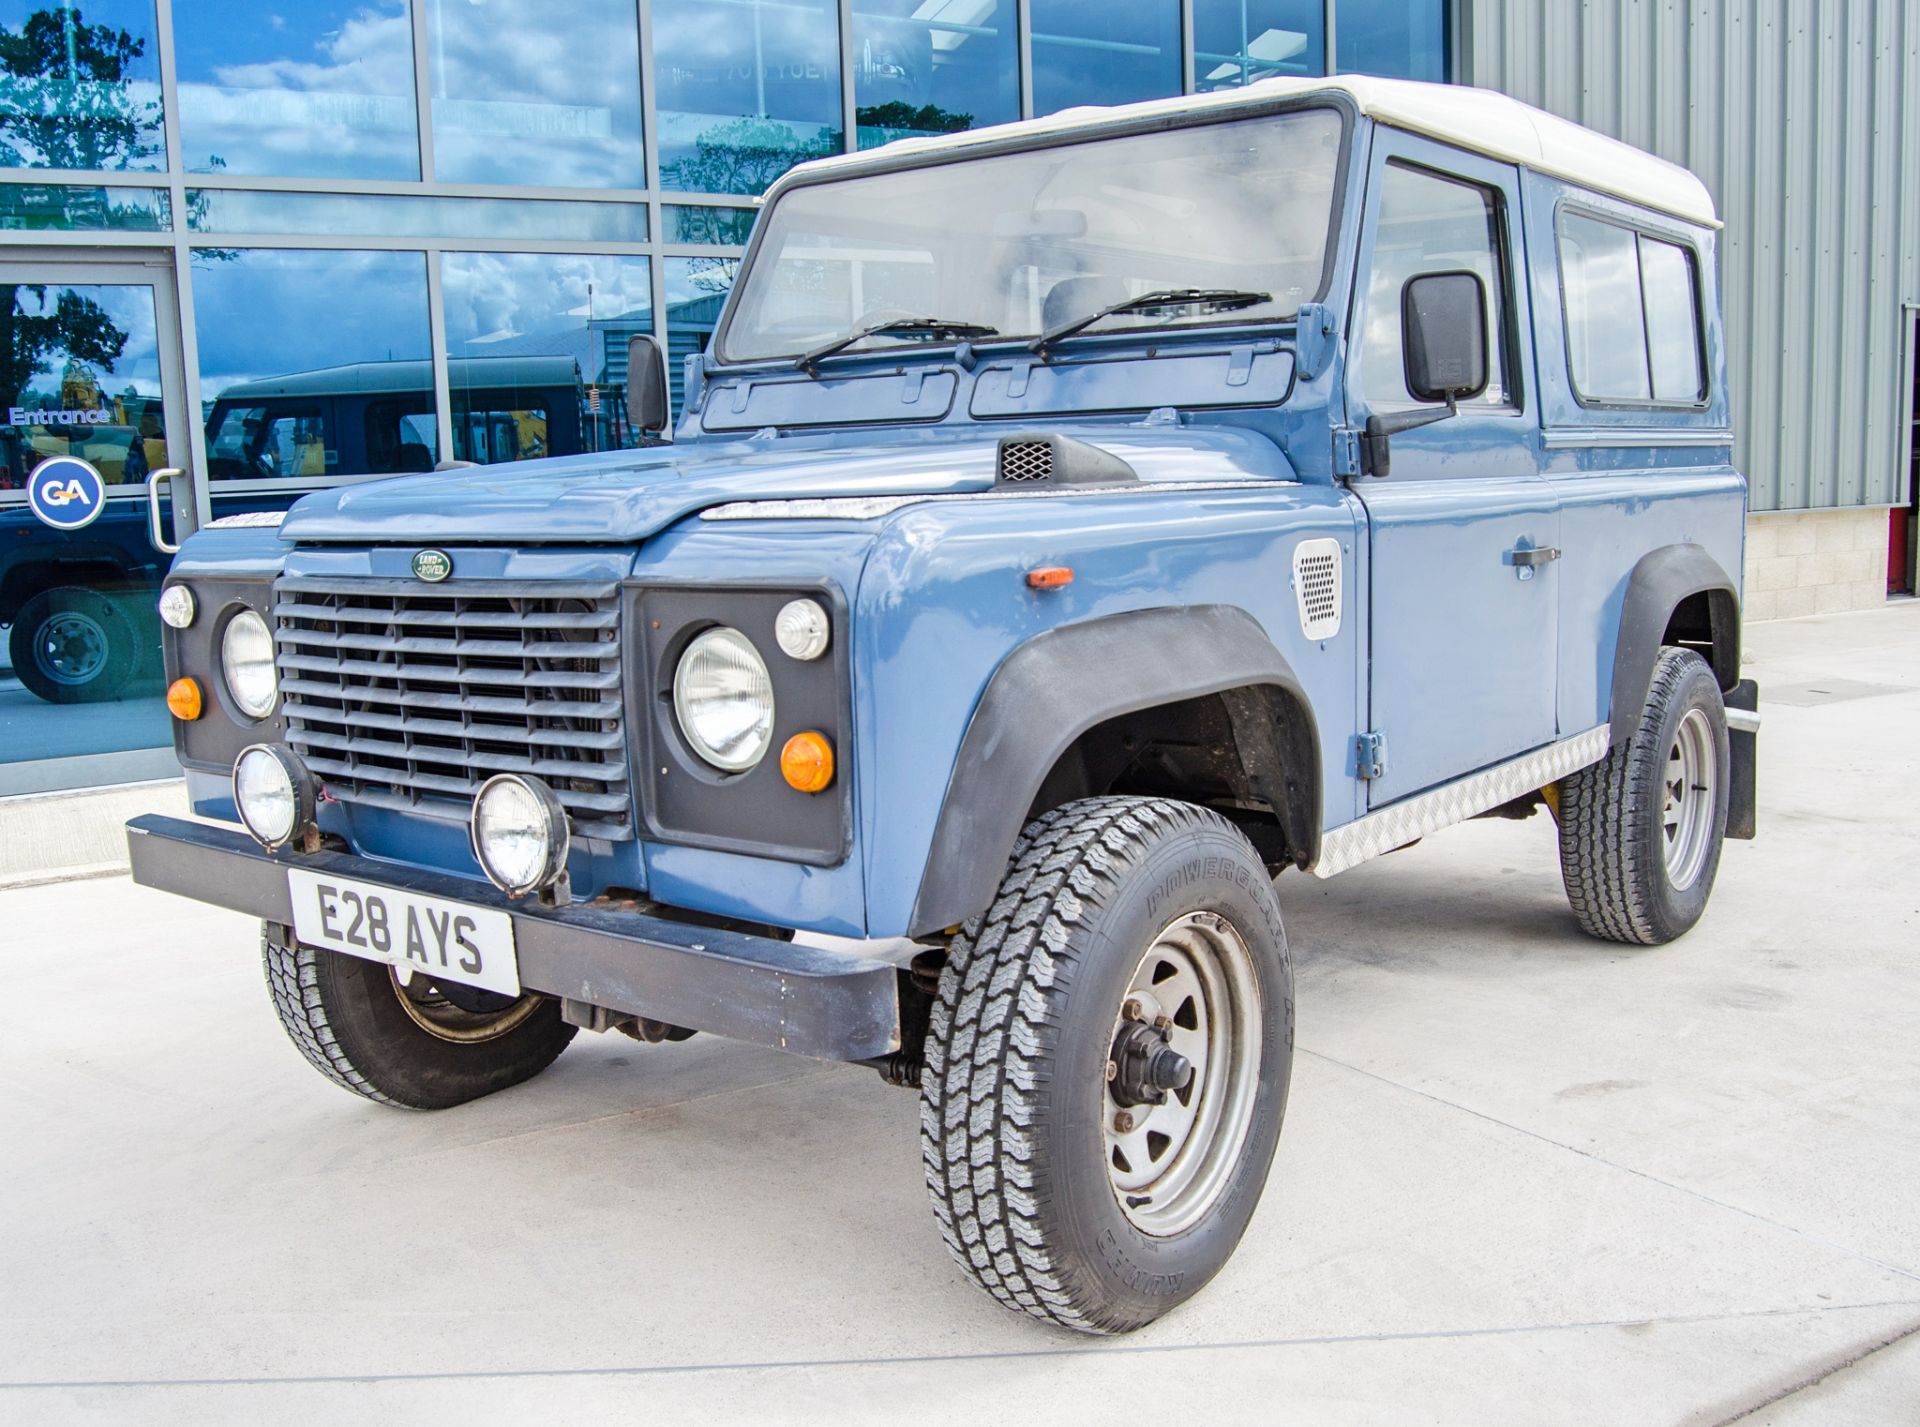 Land Rover 90 2.5 200 Tdi diesel 4wd utility vehicle Registration Number: E28 AYS Date of